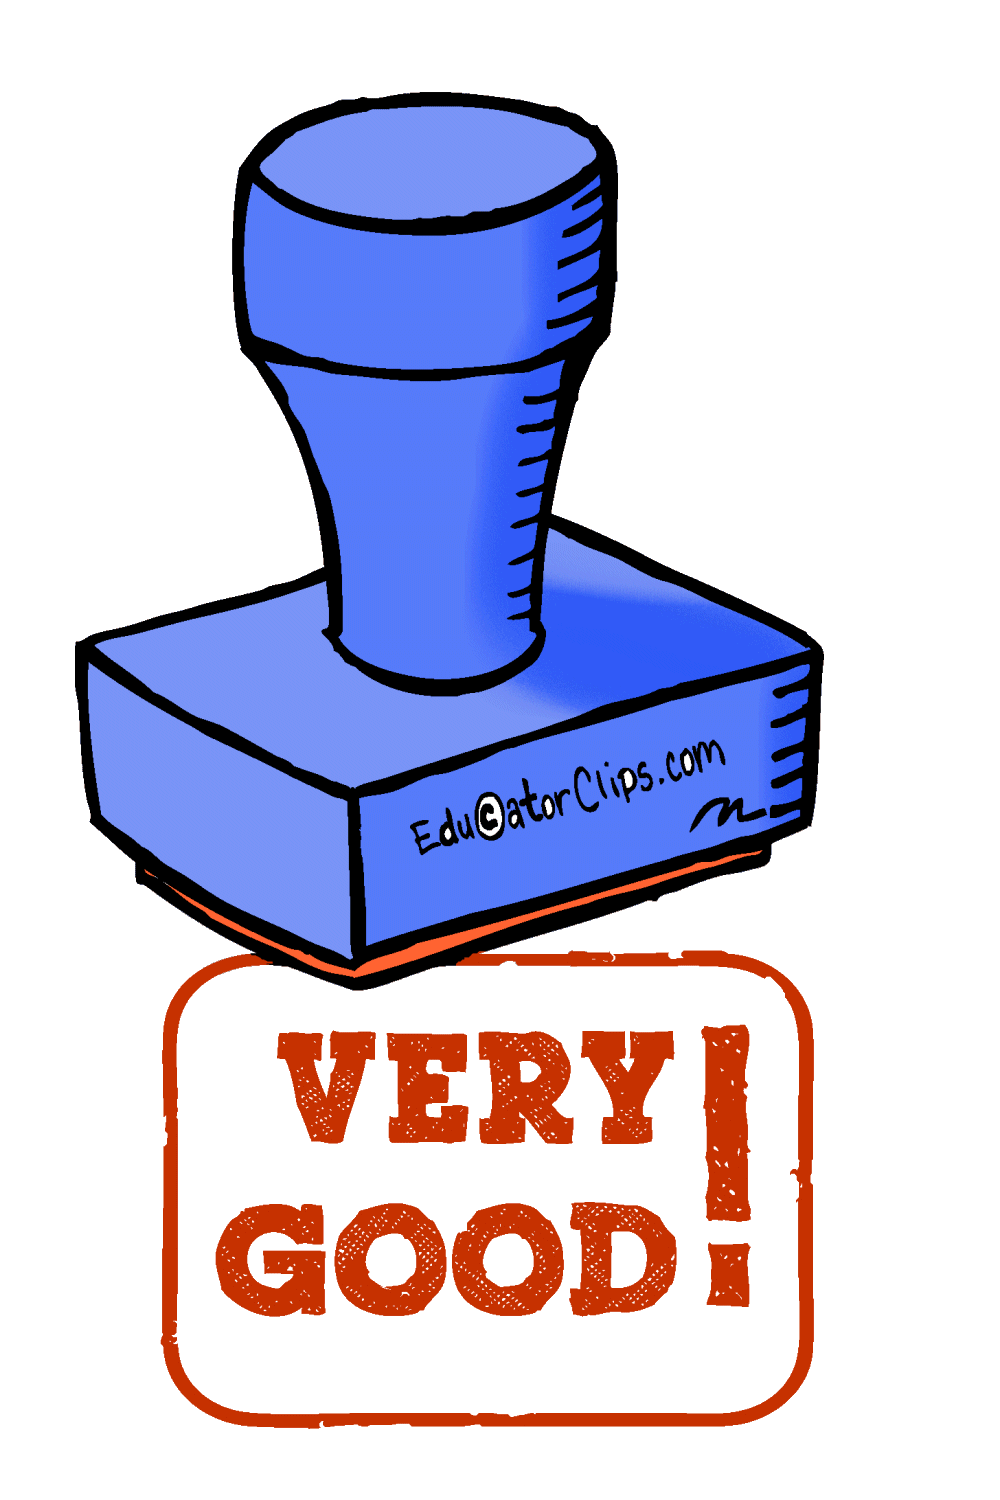 Very Good! Rubber Stamp Clip Art